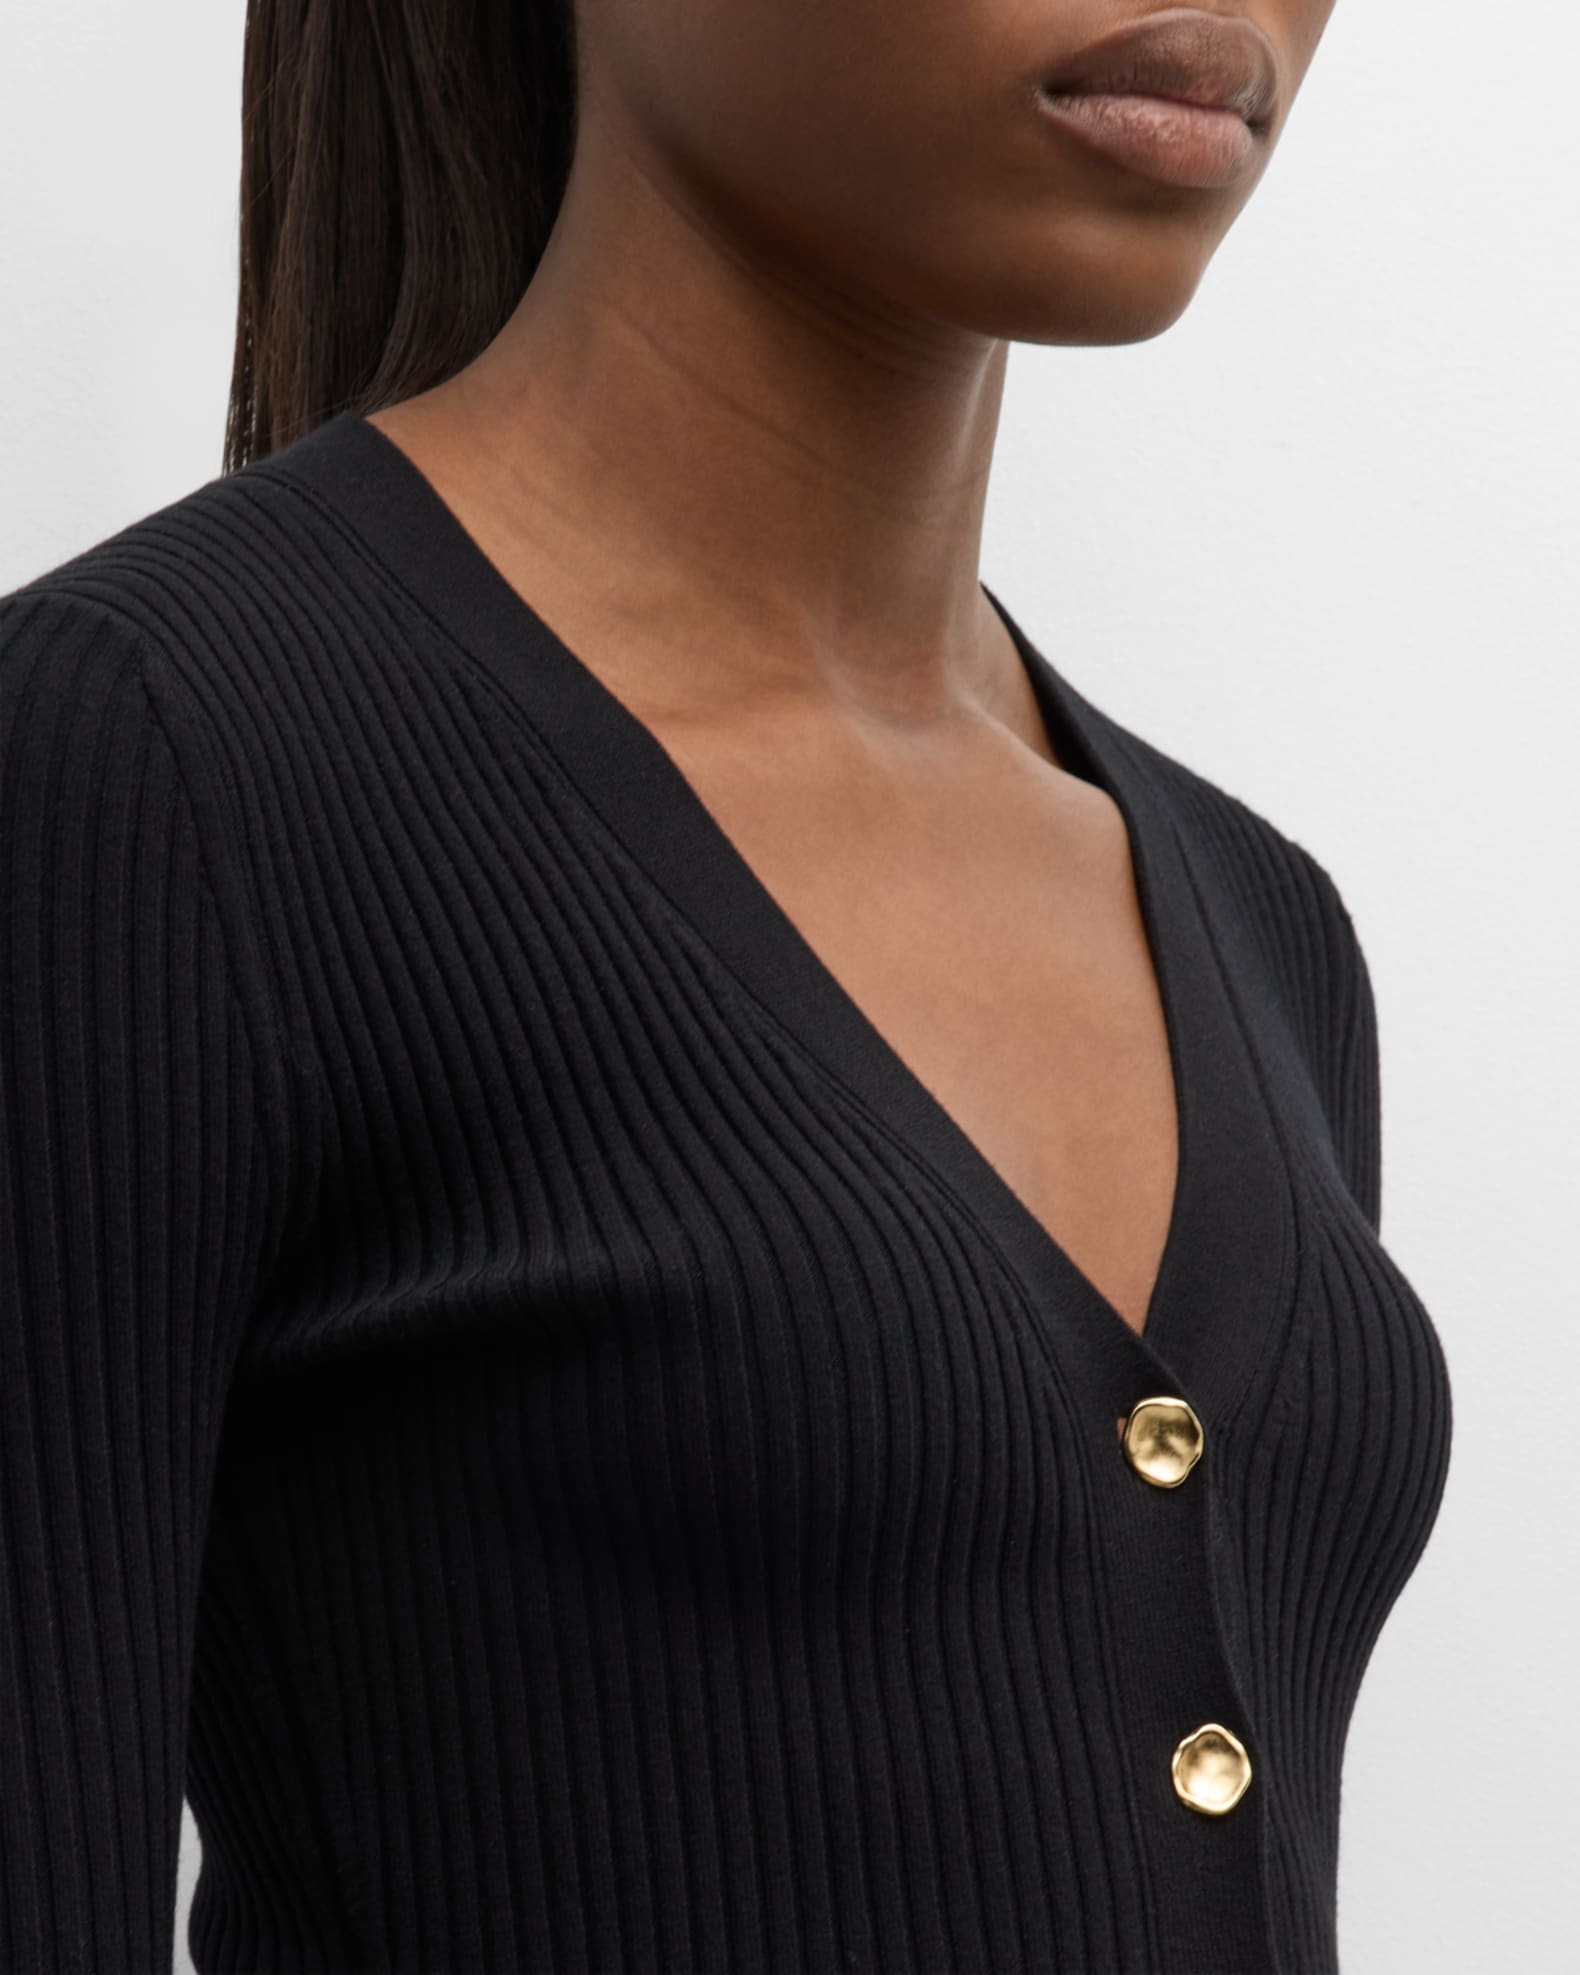 Jason Wu Collection Ribbed Peplum Cardigan with Gold-Tone Buttons ...